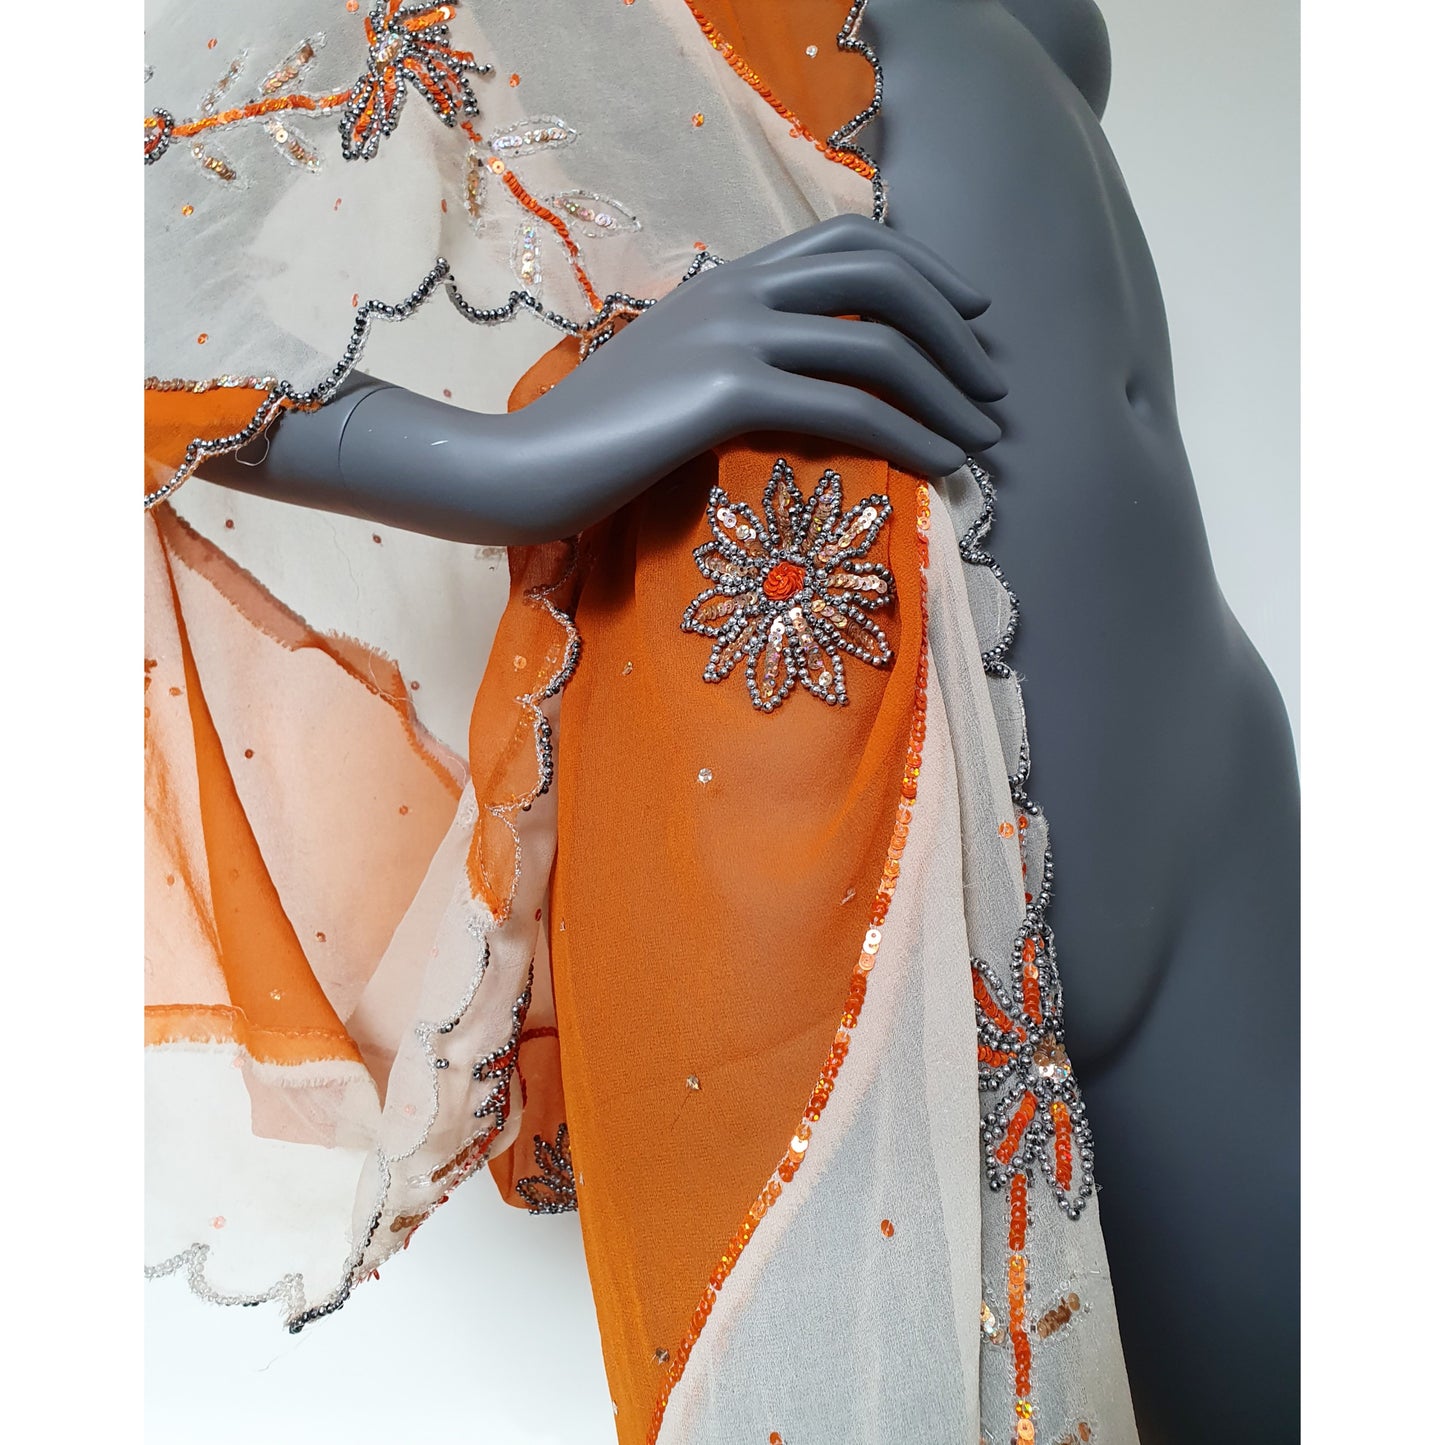 Draped kimono in orange and white with floral hand embroidery (M)